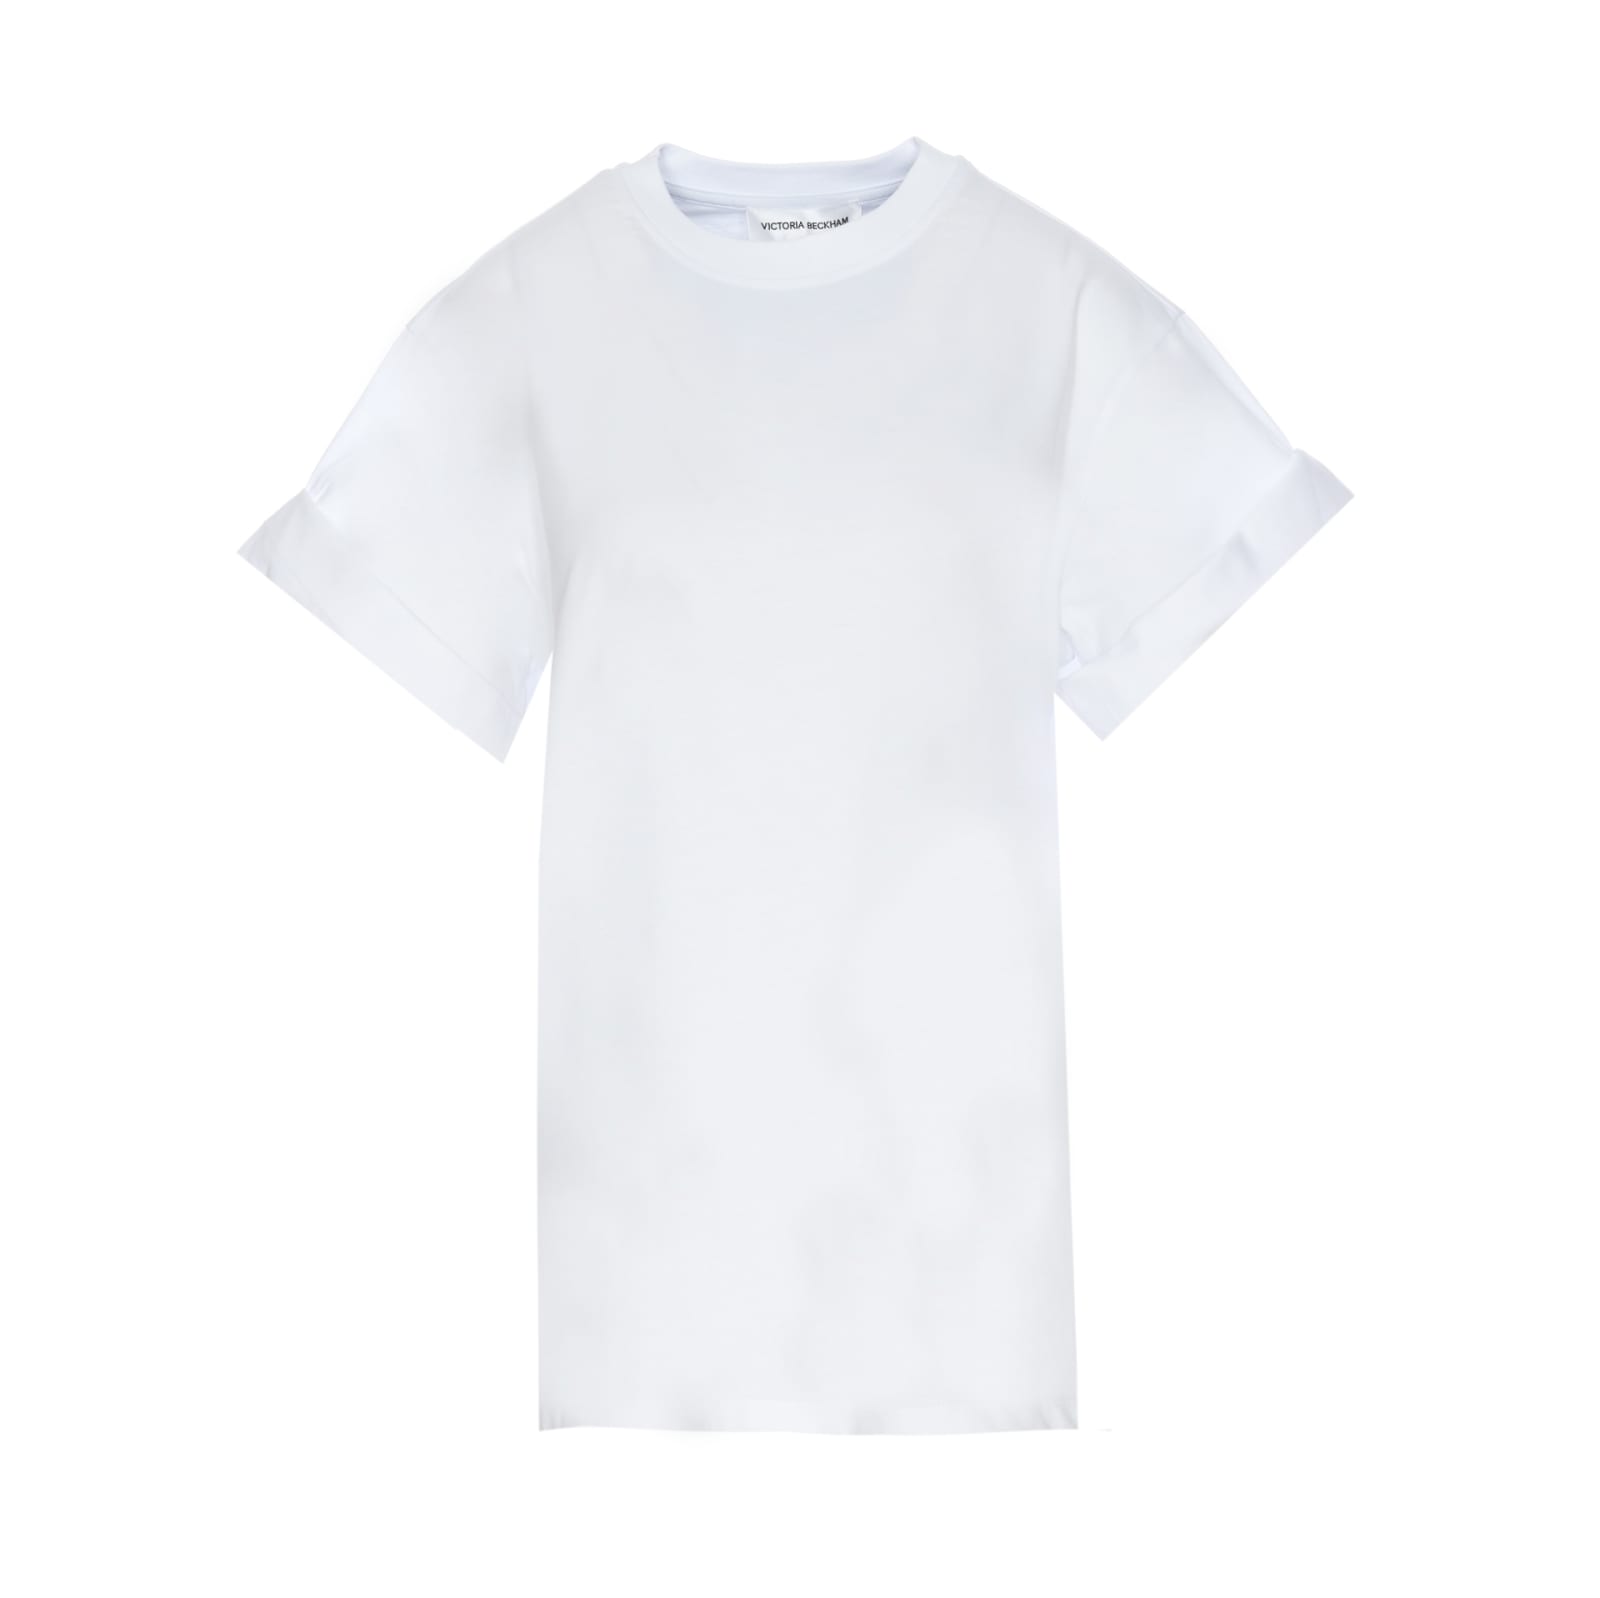 Victoria Beckham T-shirt Asymmetrical Relaxed Fit In White